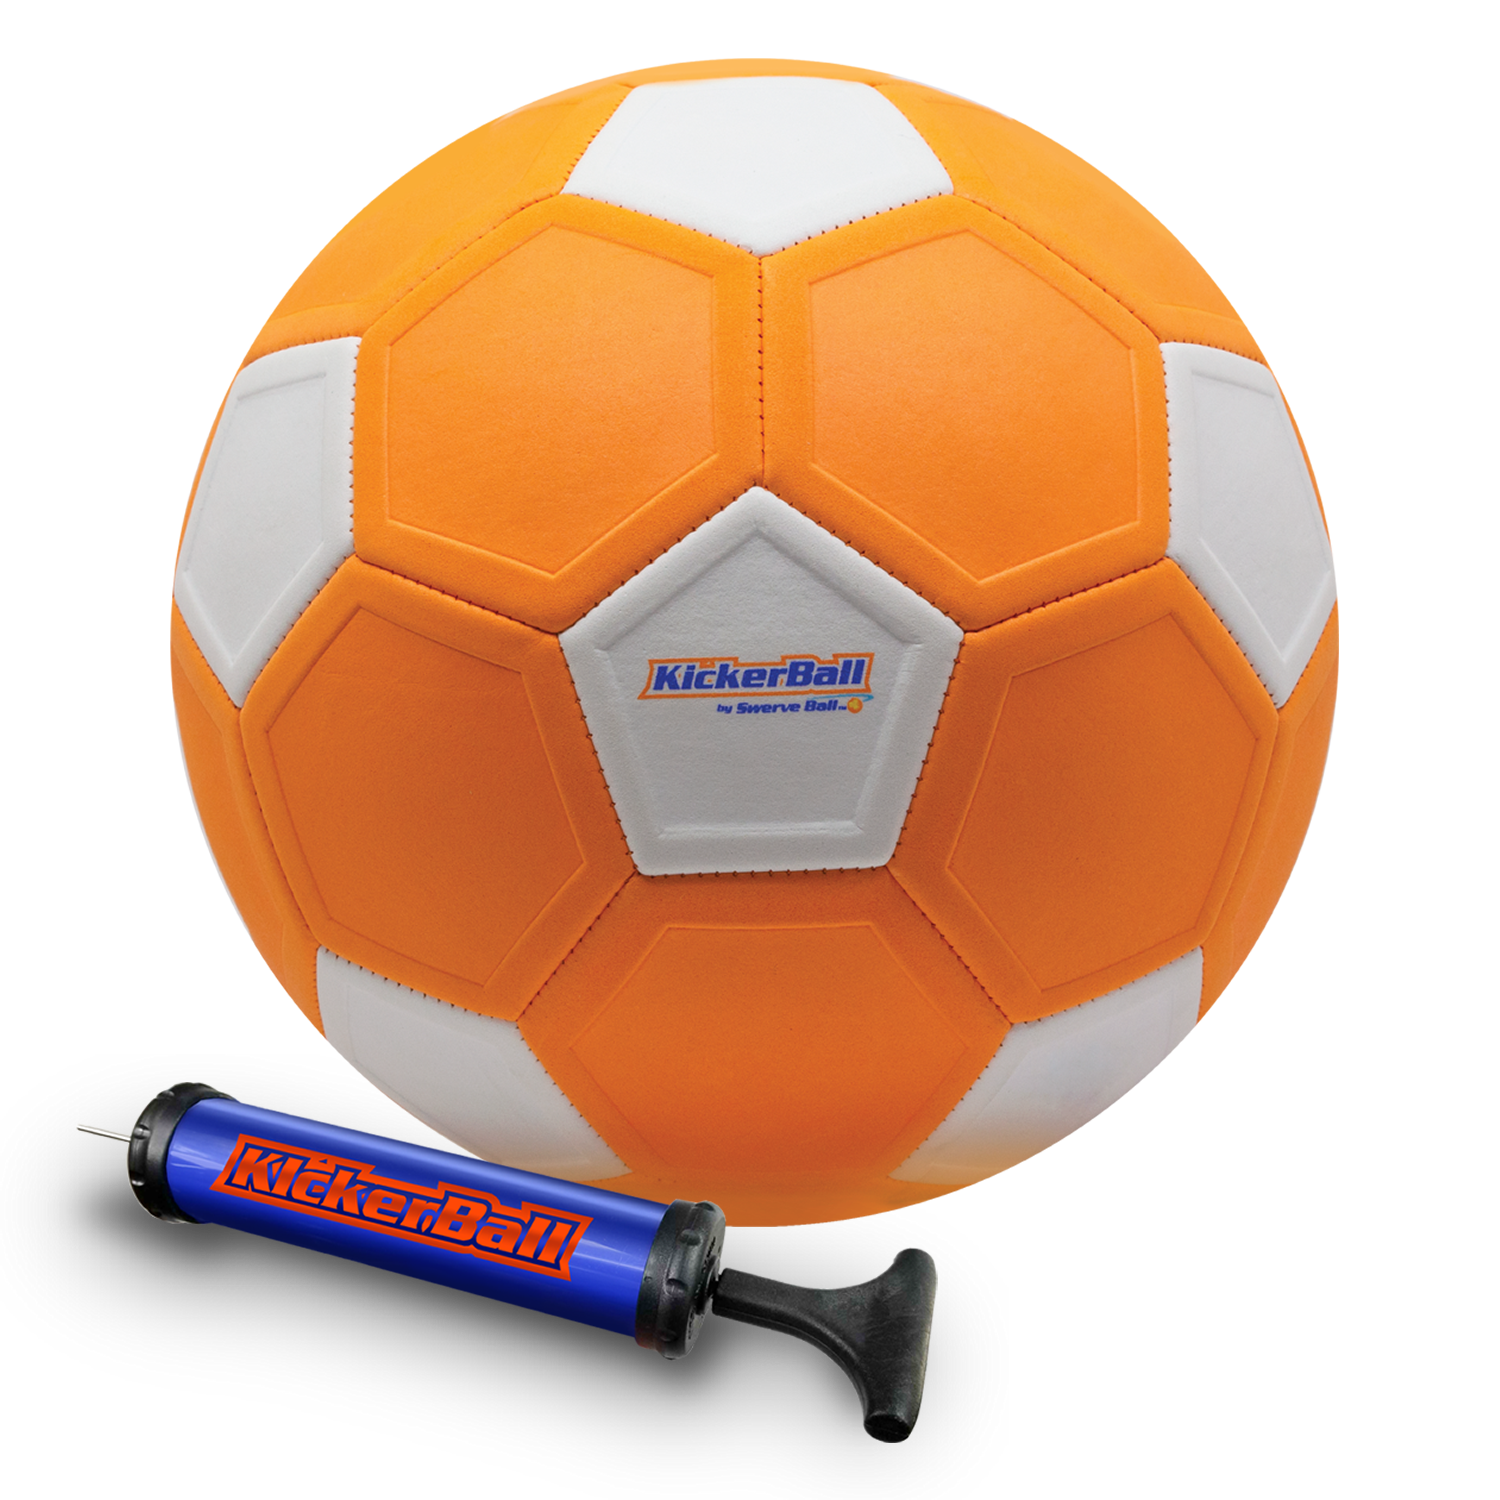 KICKERBALL PLAY LIKE A PRO! STACKABLE ASSORTED STYLES